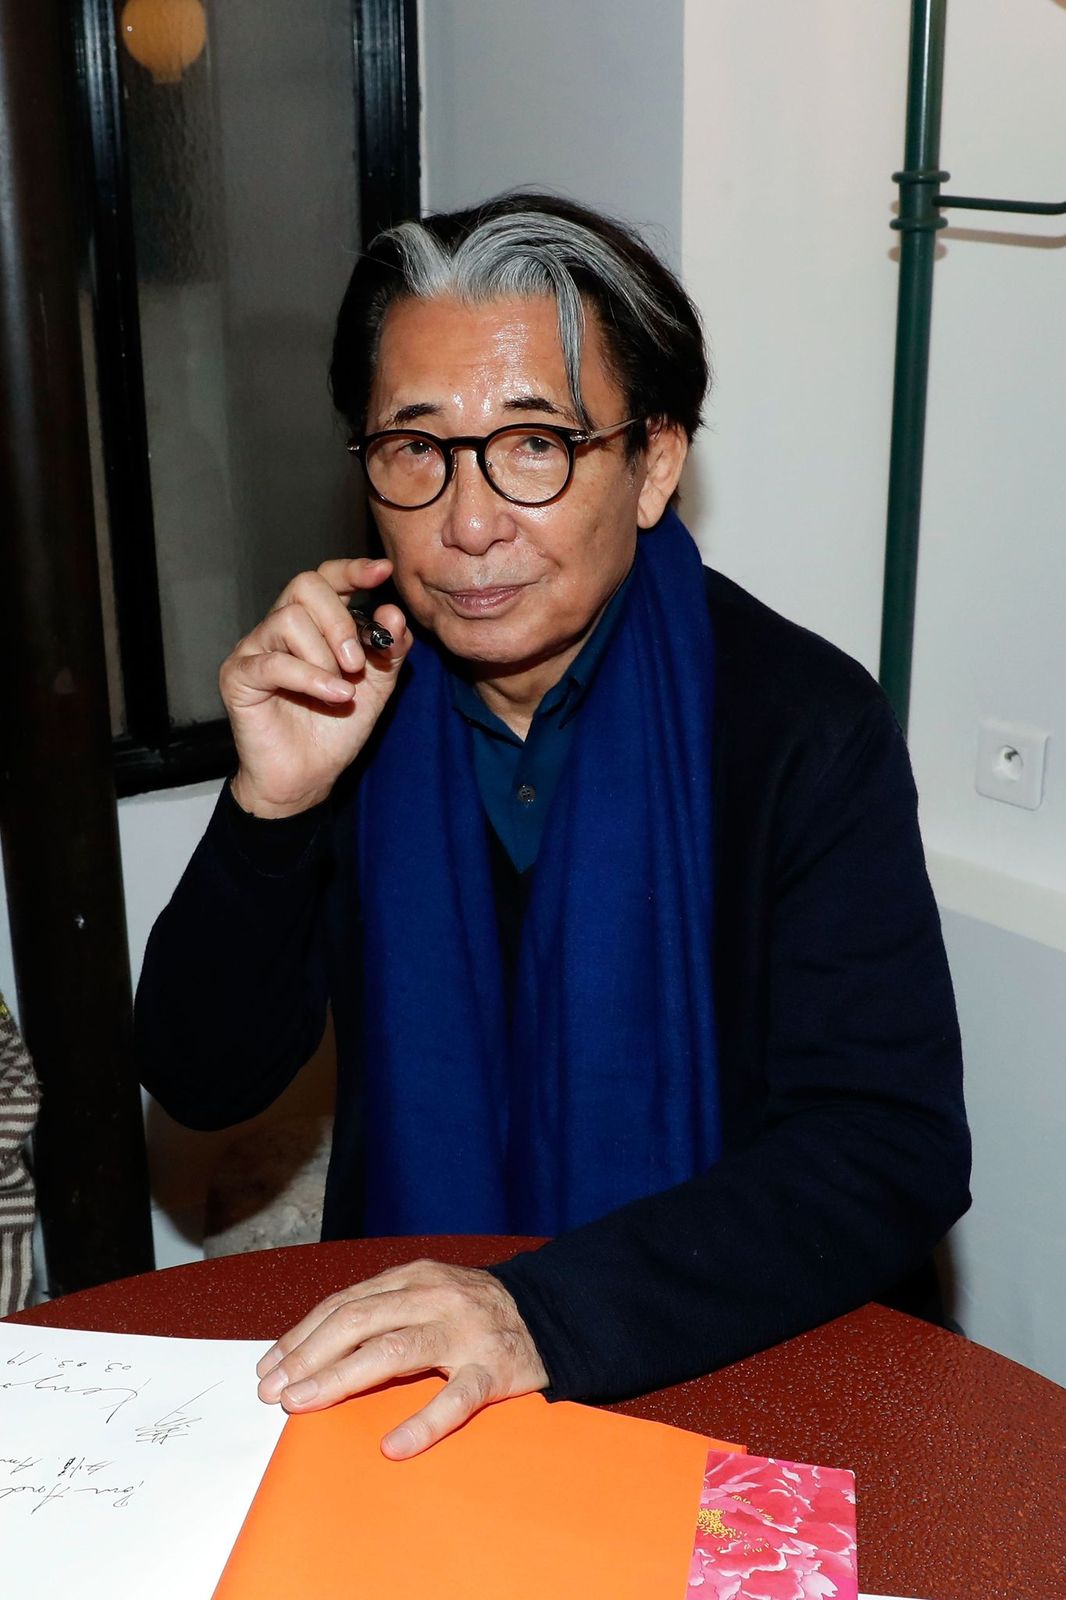 Kenzo Takada at a book signing as part of the Paris Fashion Week Womenswear Fall/Winter 2019/2020 on March 02, 2019, in Paris, France | Photo: Bertrand Rindoff Petroff/Getty Images